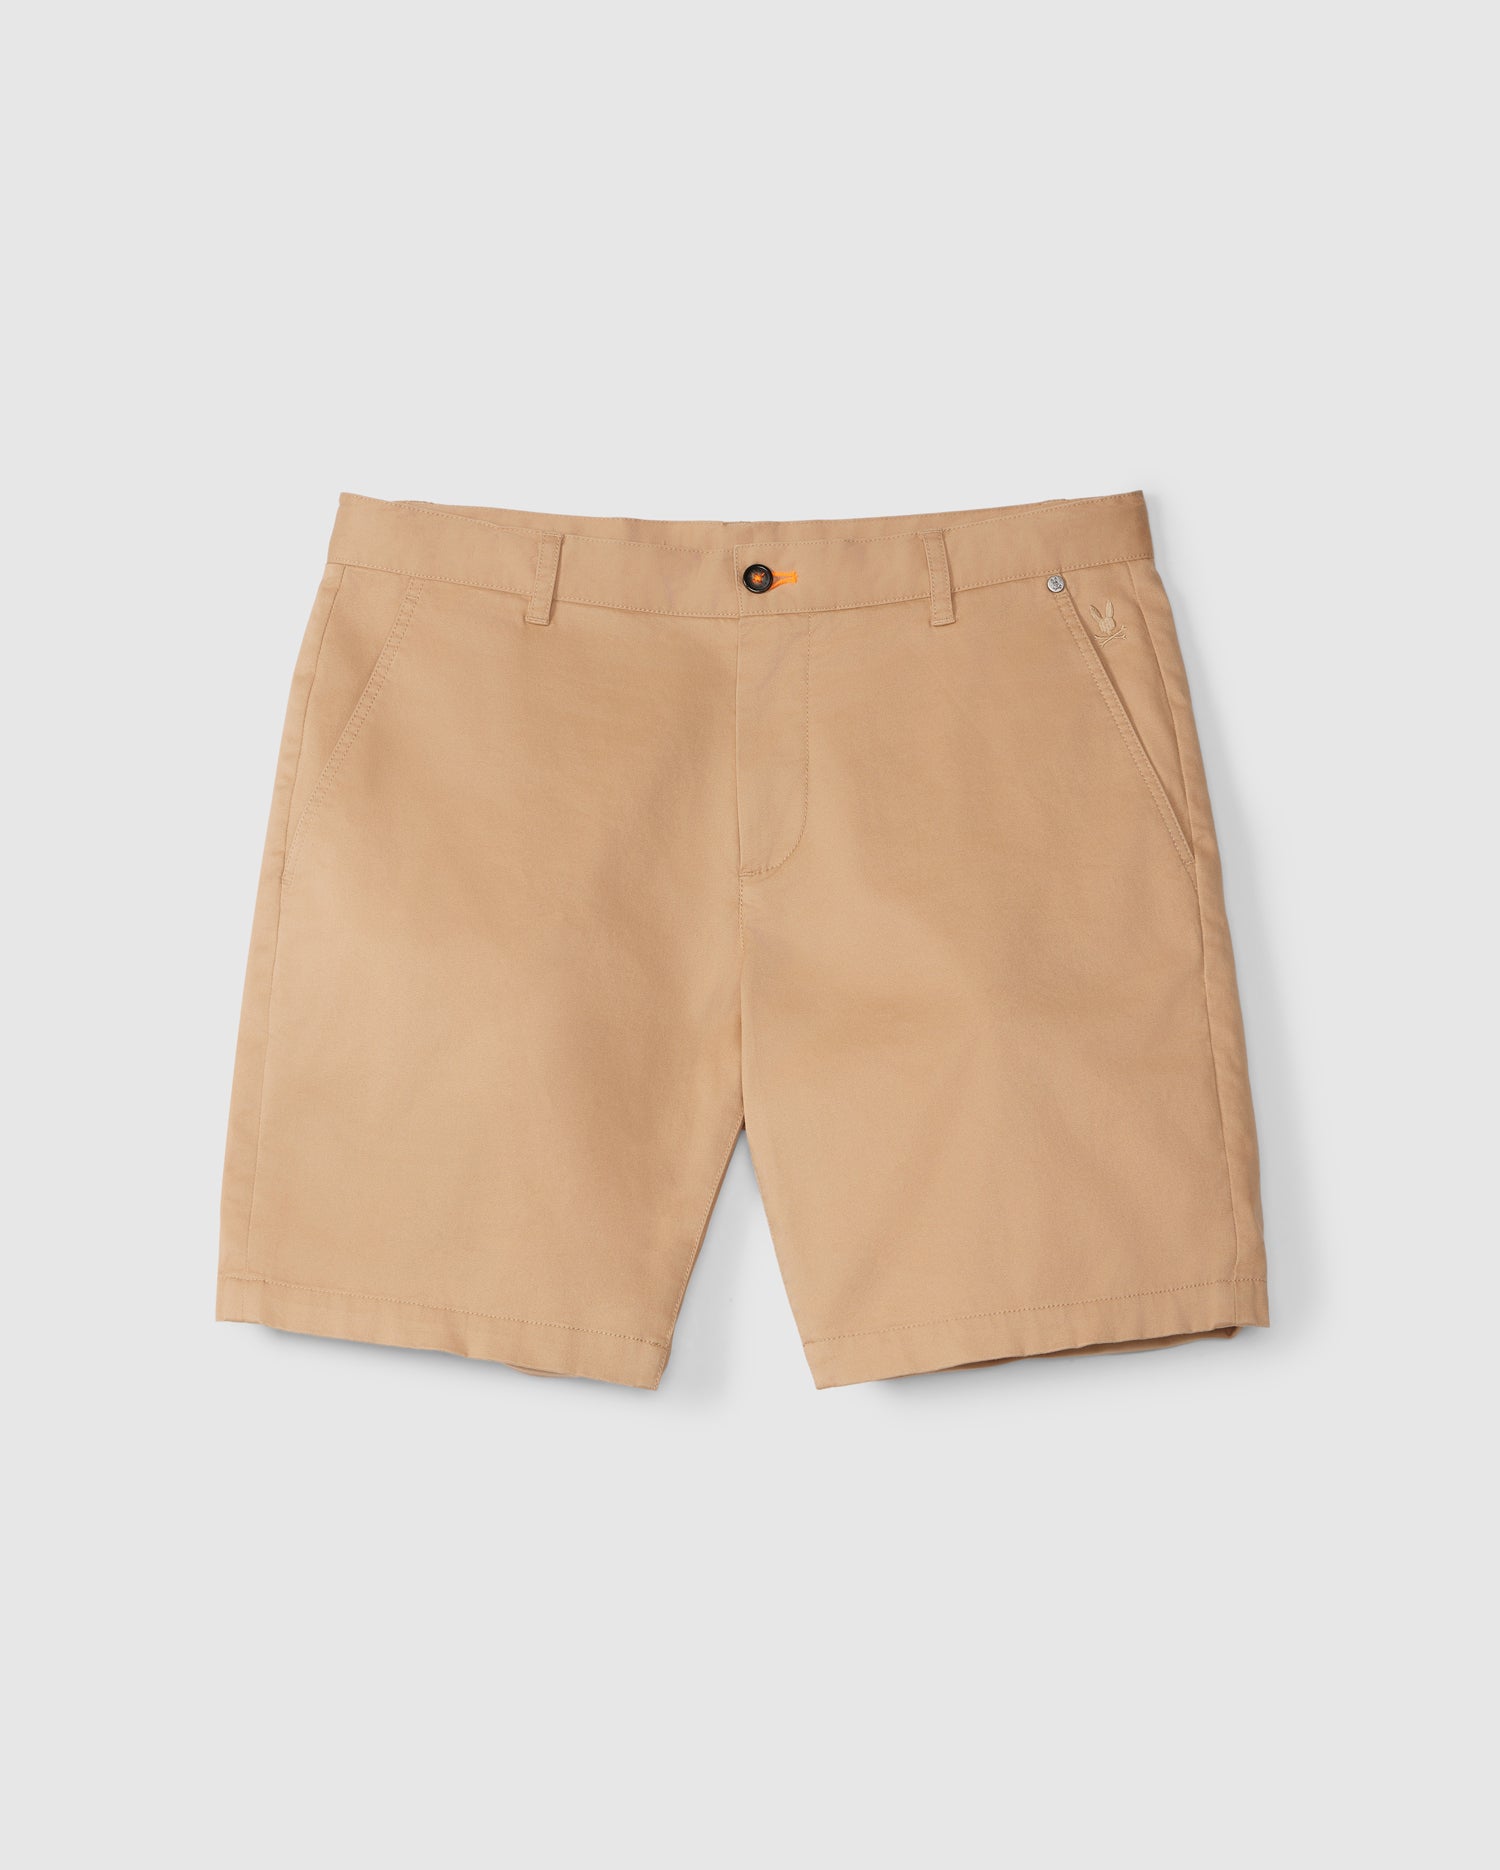 Men's Psycho Bunny York chino shorts with an orange button and an embroidered logo, displayed flat on a white background.